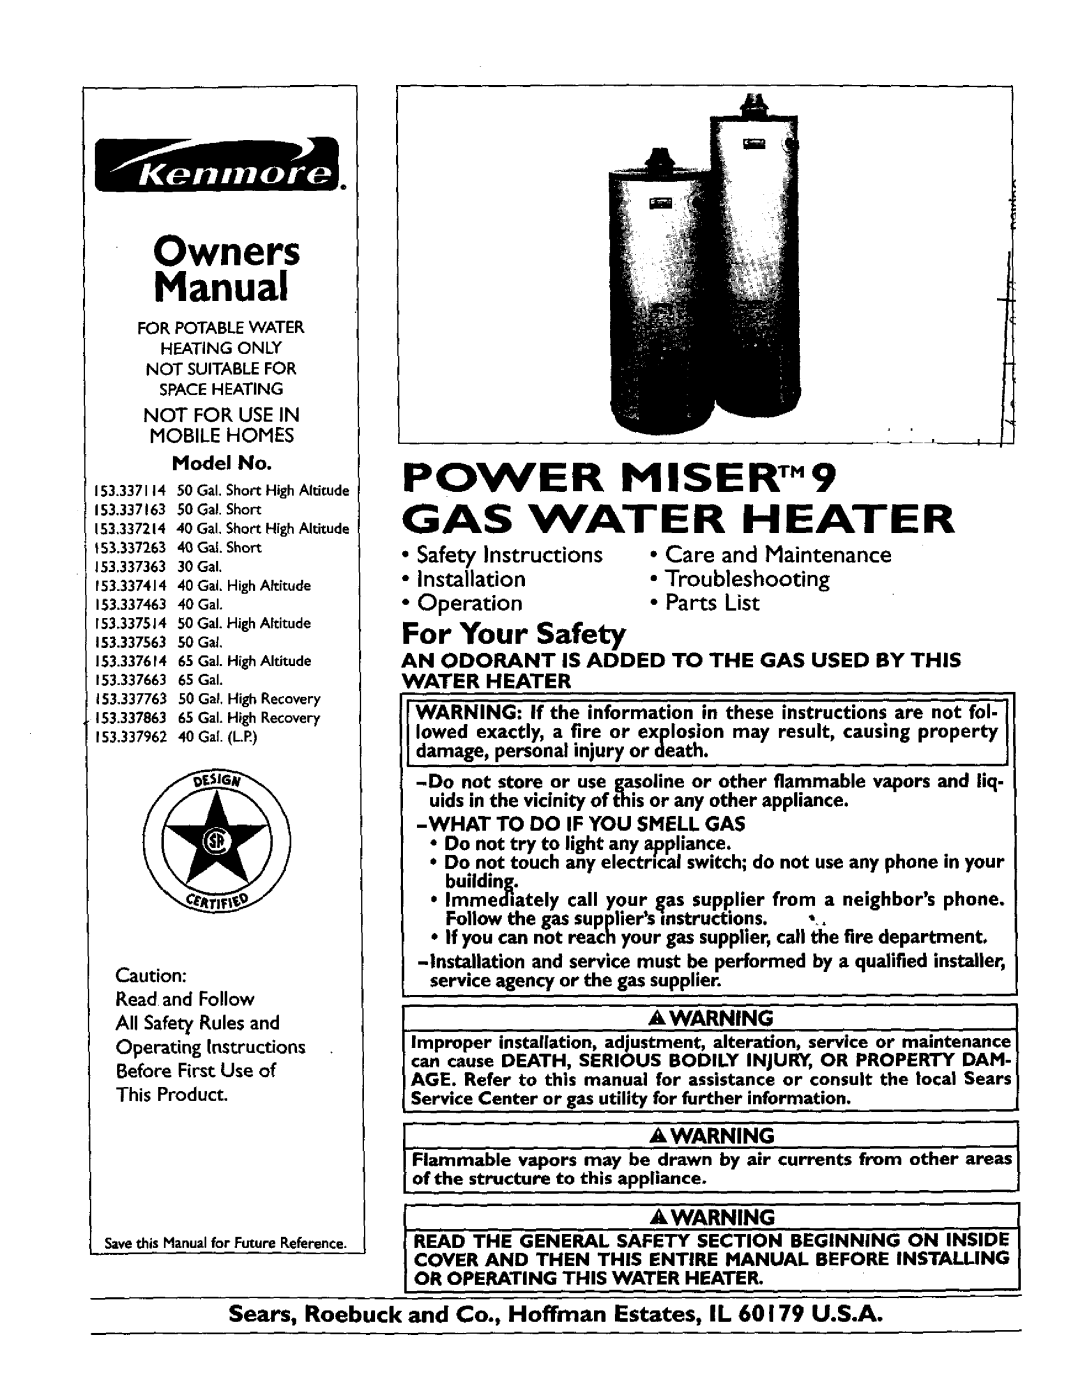 Kenmore 153.337963 owner manual For Your Safety, POWER MISERTM9 GAS WATER HEATER, Safety Instructions, Troubleshooting 